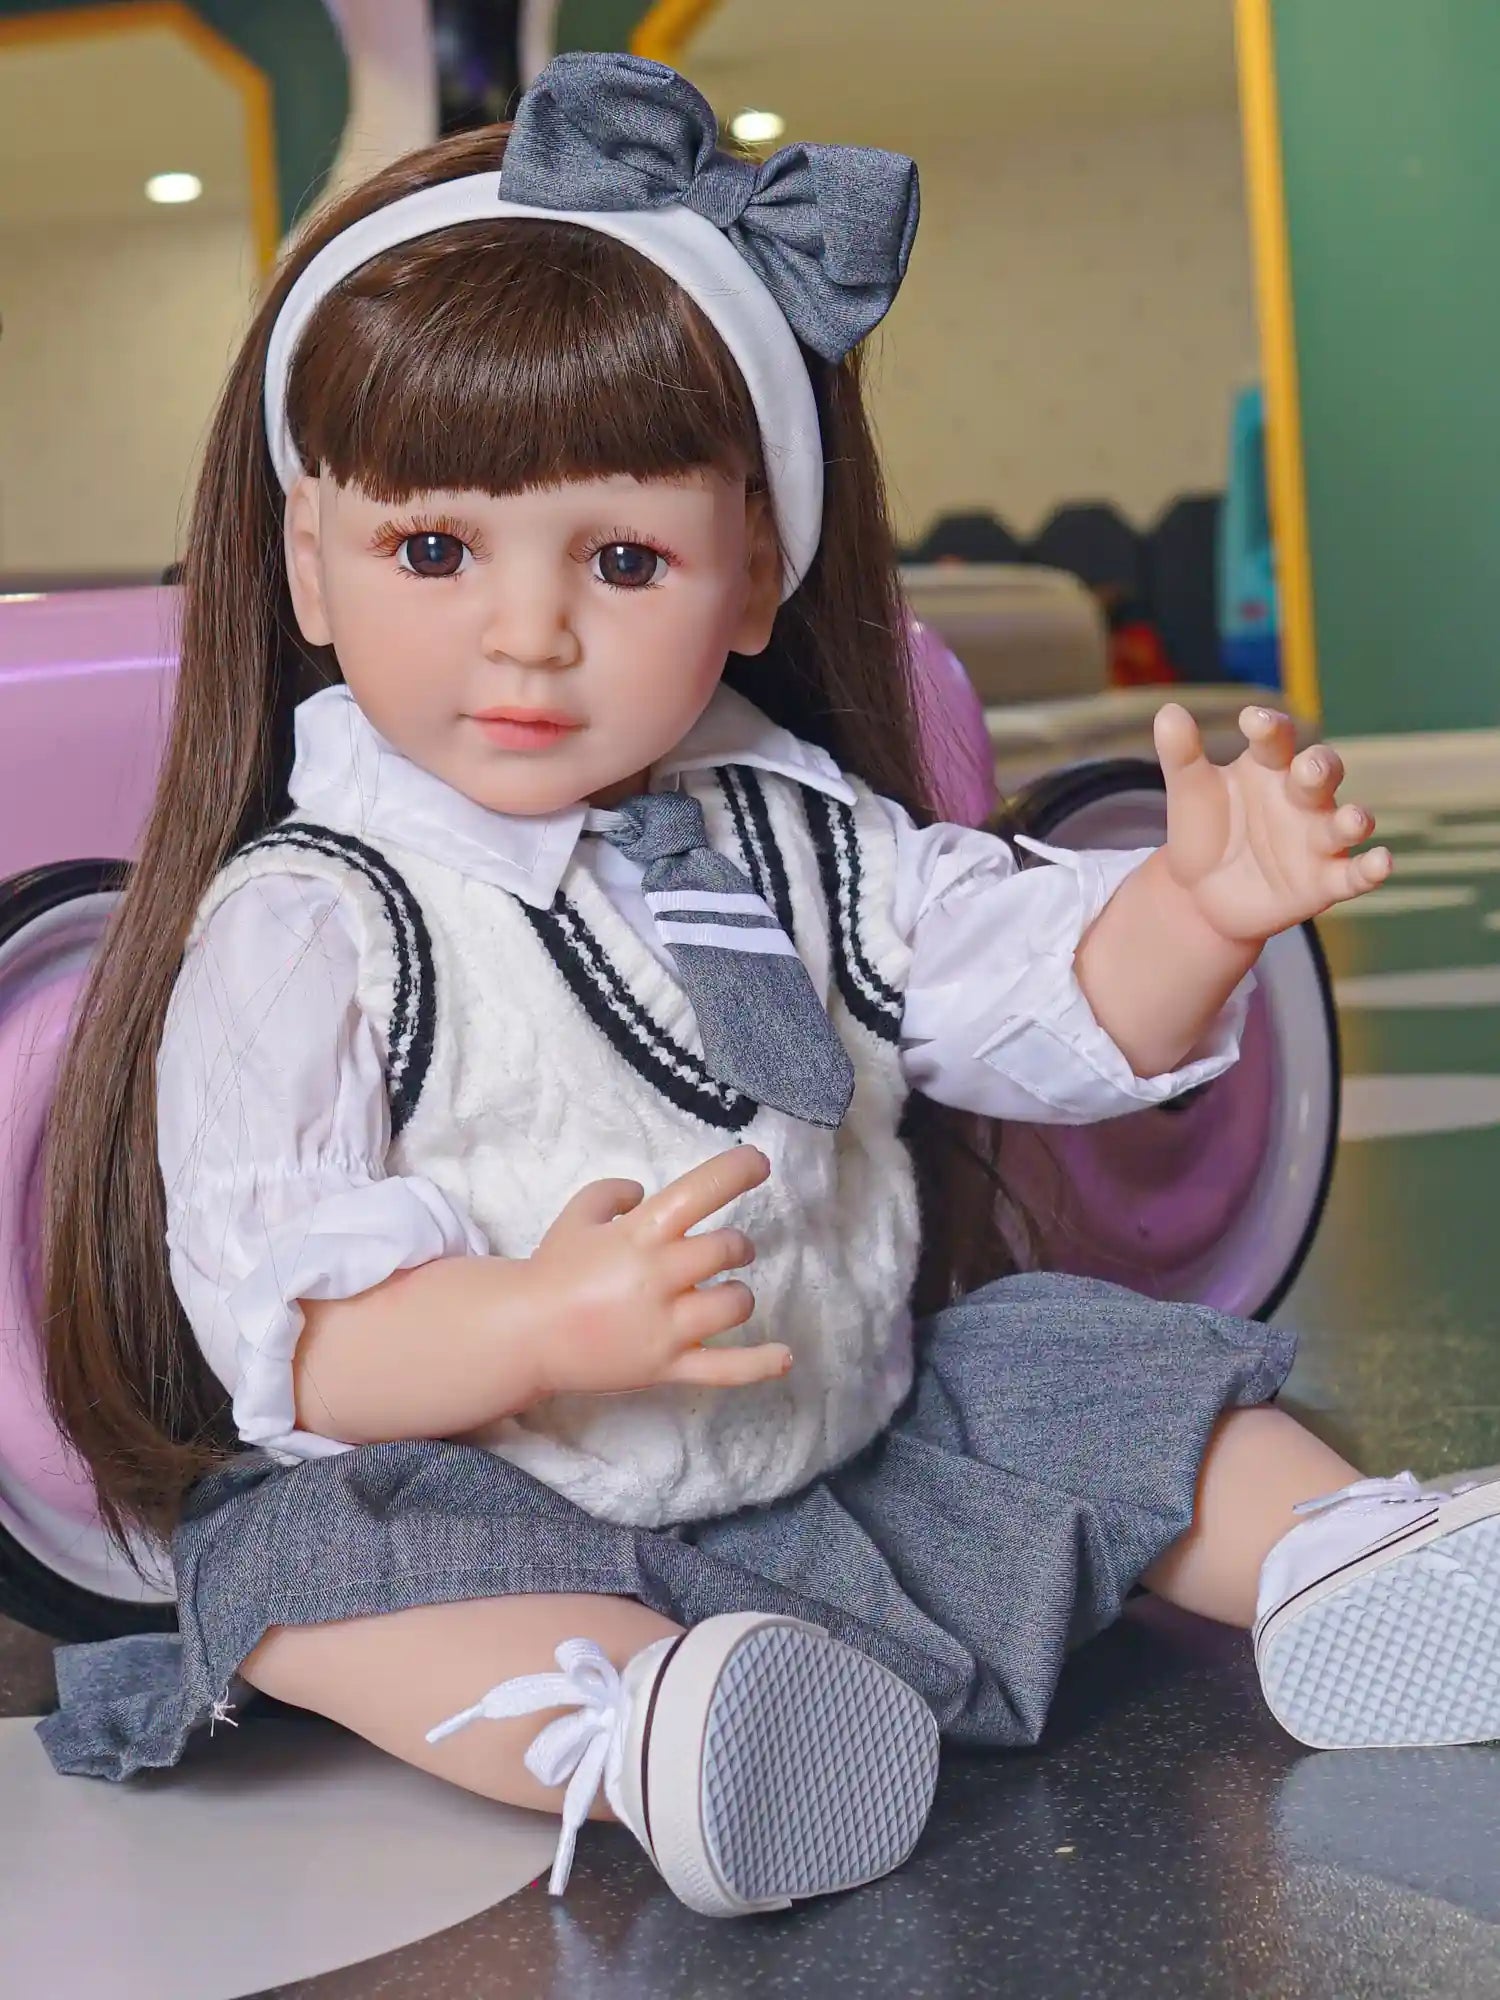 Detailed reborn doll with an attentive expression, dressed in a classic school uniform with a white blouse and grey skirt, and accessorized with a large bow headband.